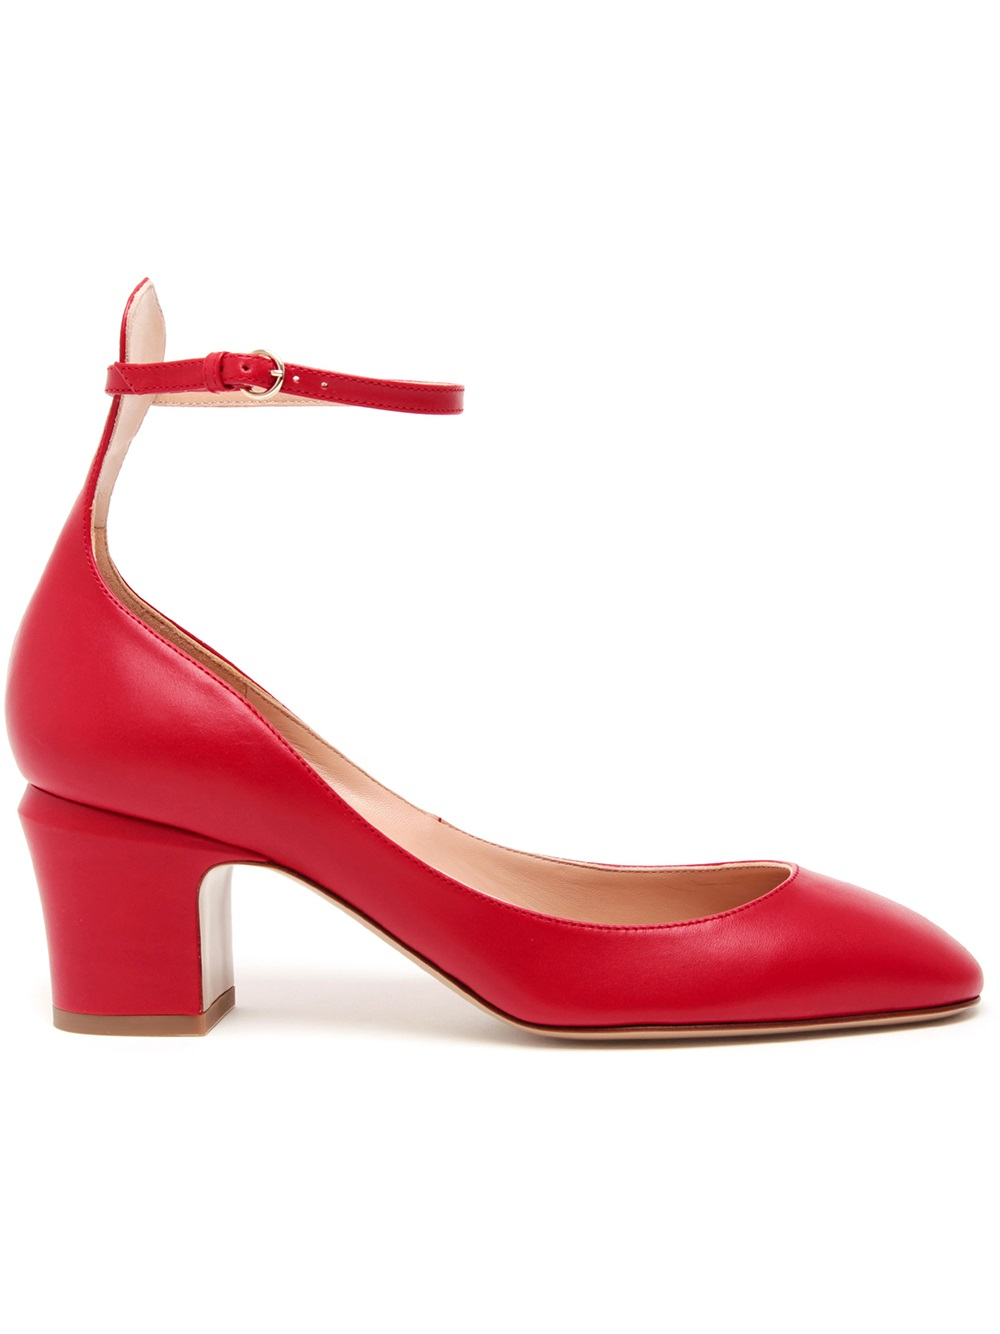 Valentino Tango Matte Leather Mary Jane Pumps in Red | Lyst